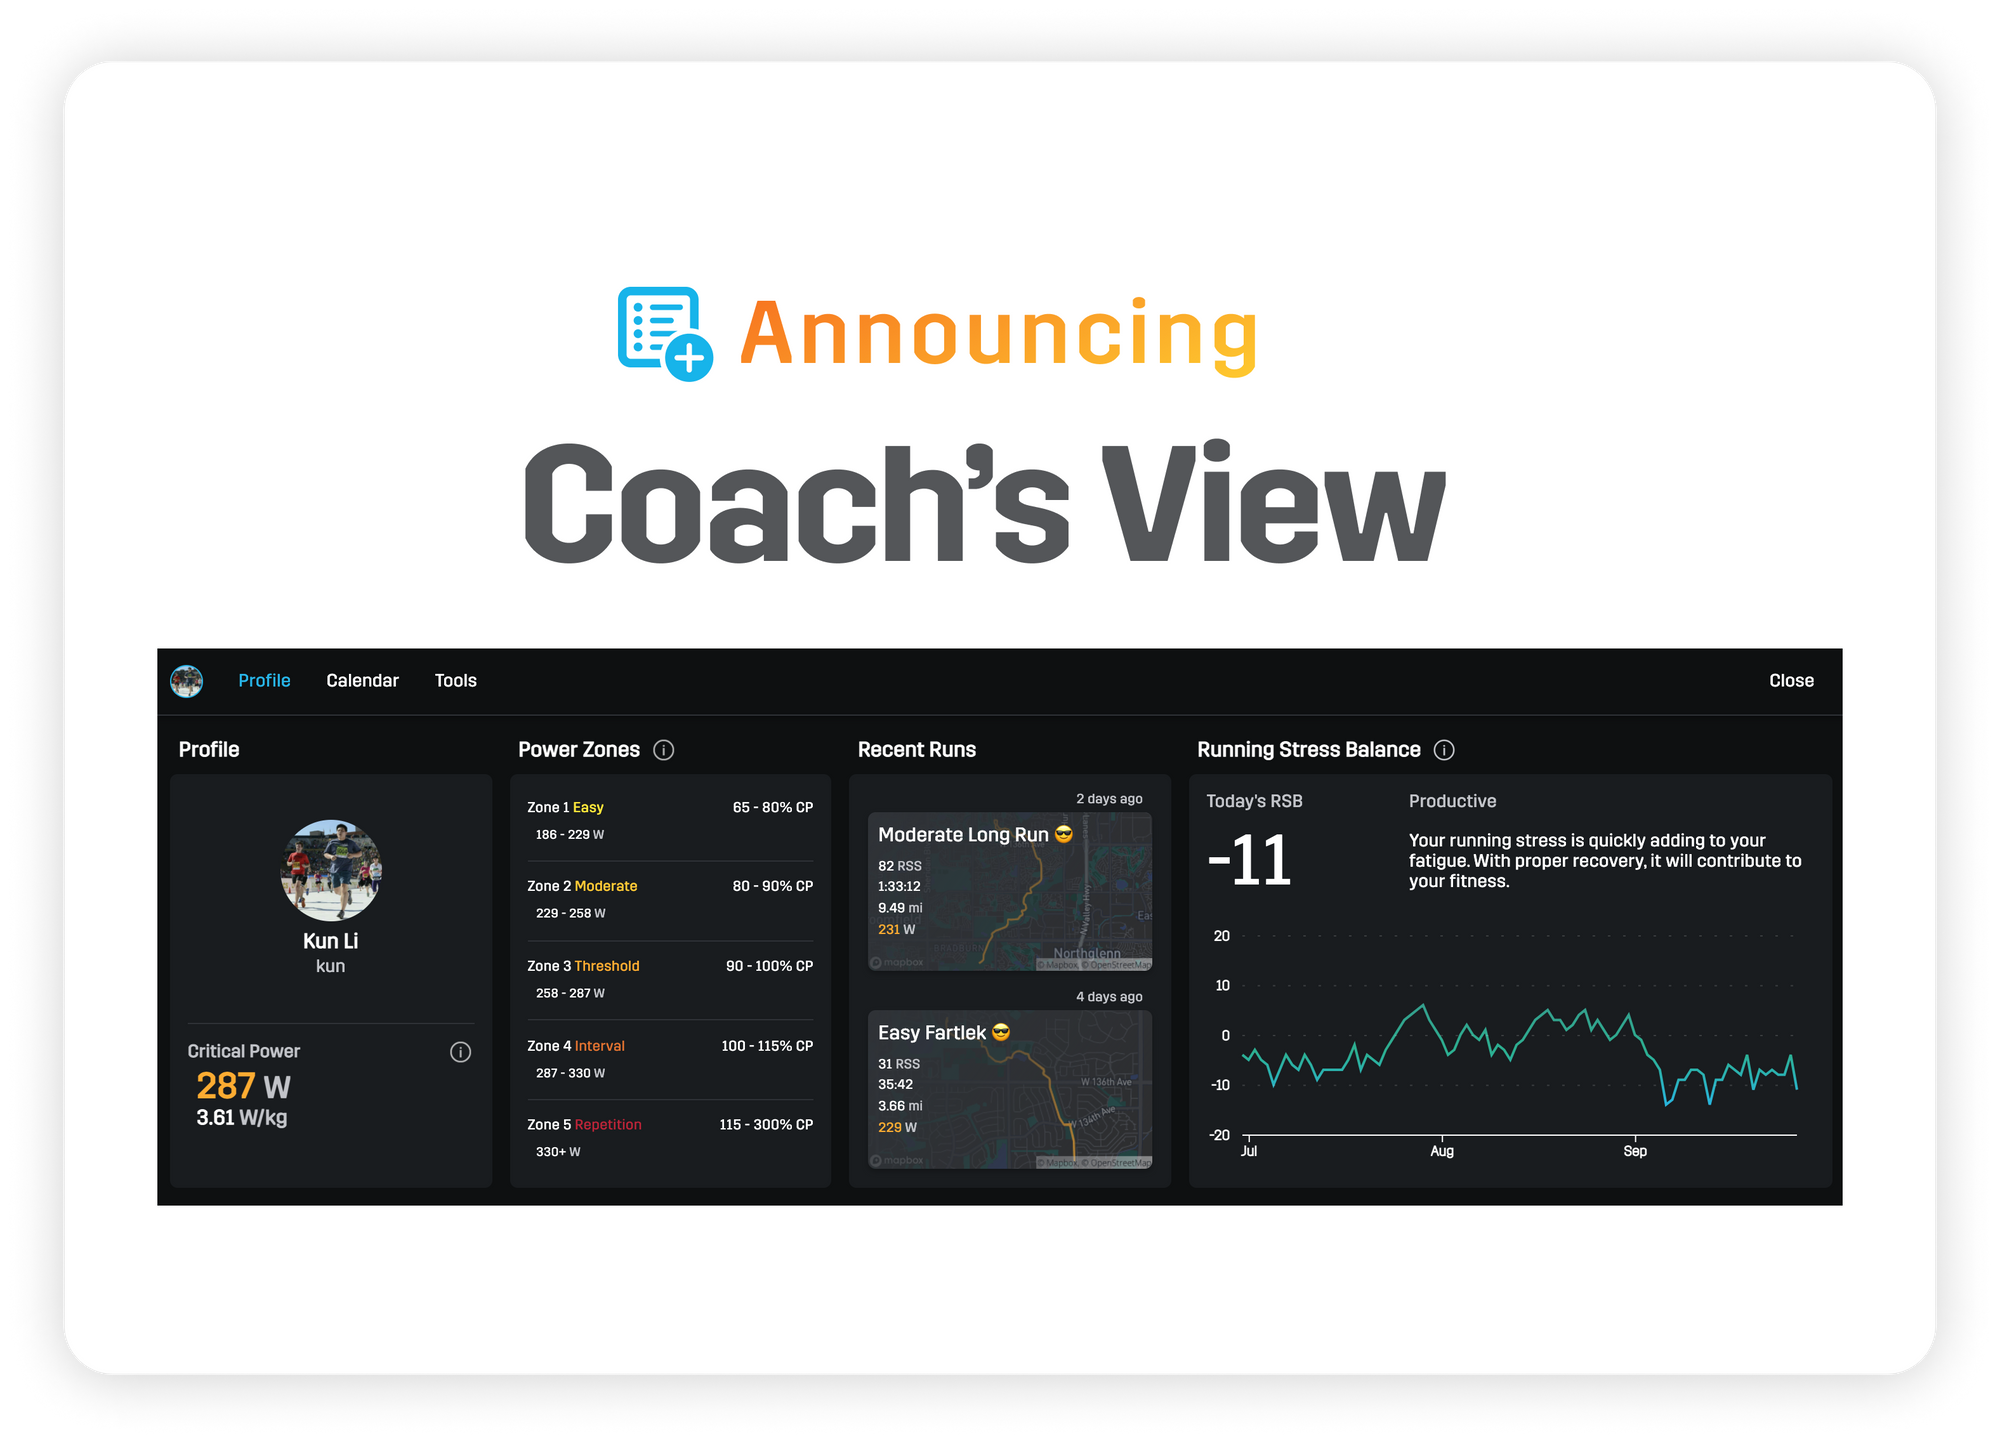 Easily collaborate with your coach using the new Coach's View